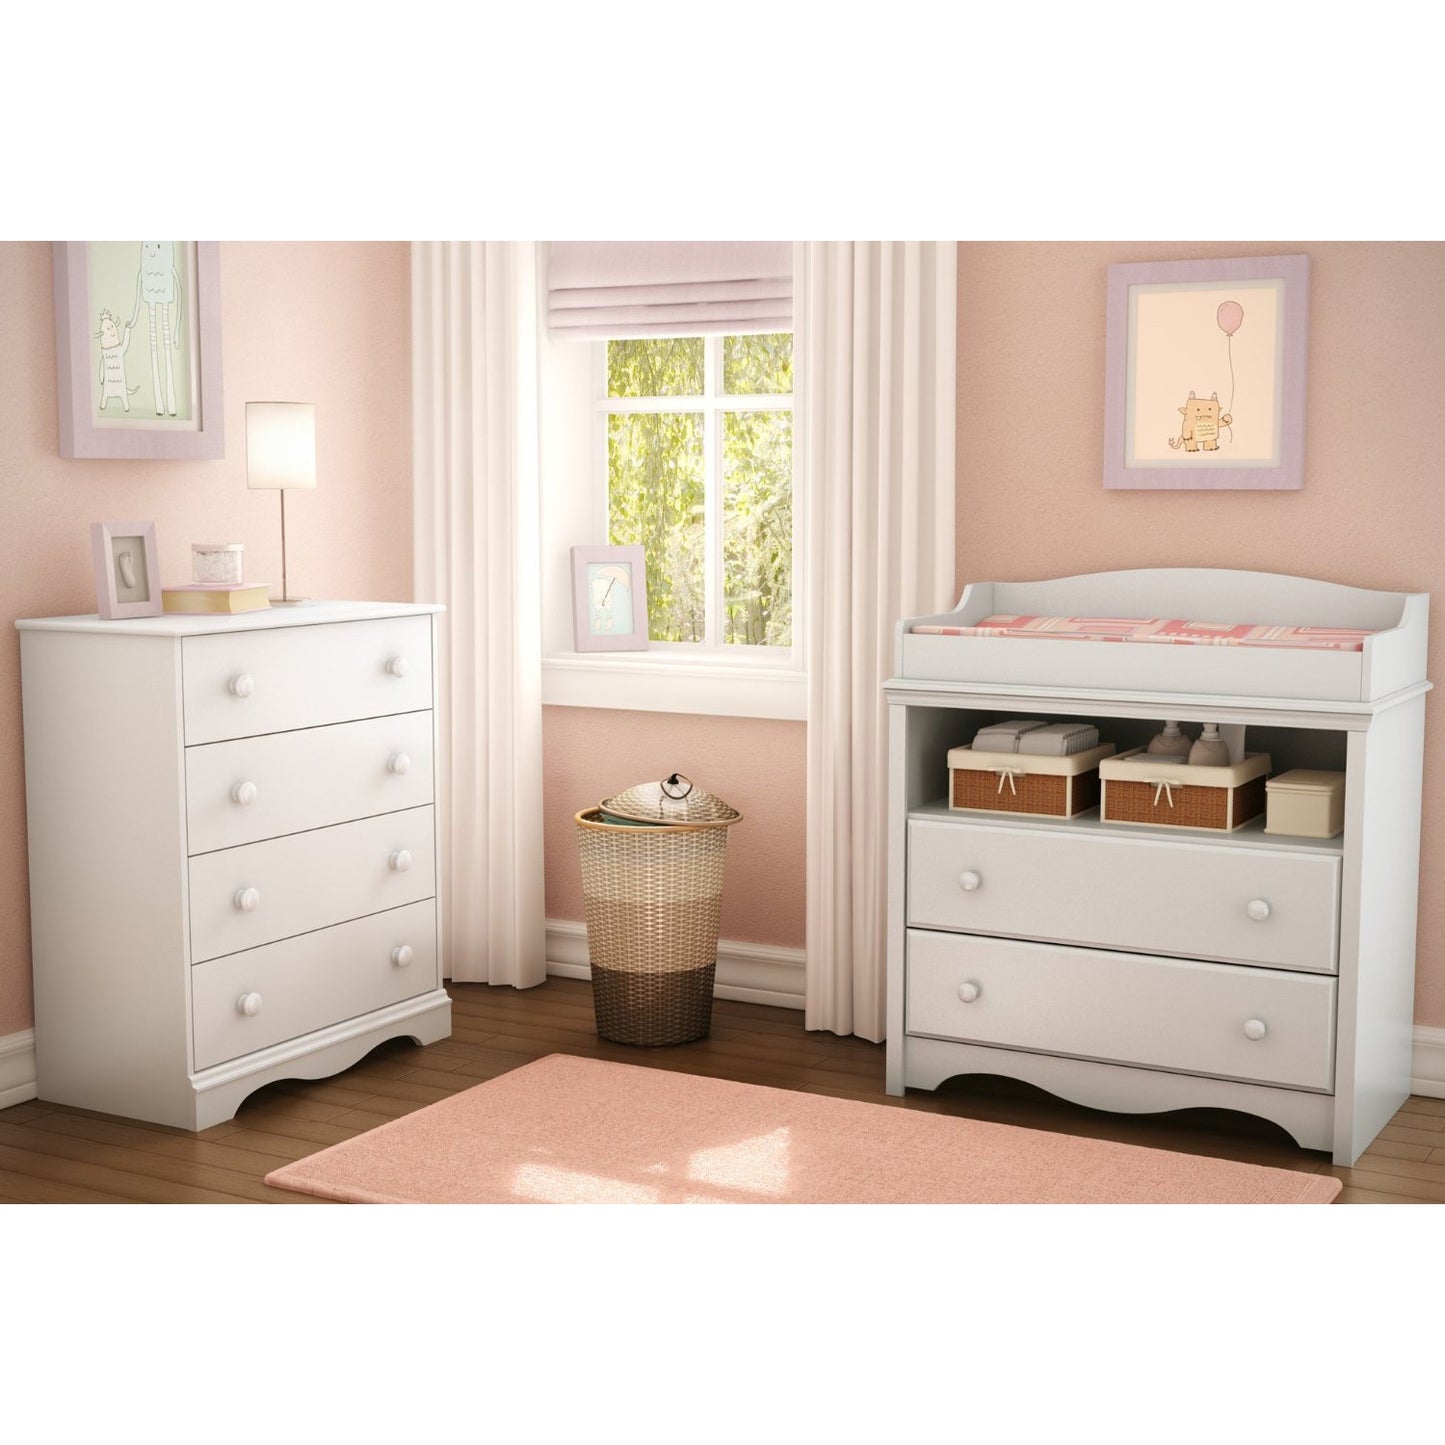 White 4 Drawer Bedroom Chest with Wooden Knobs